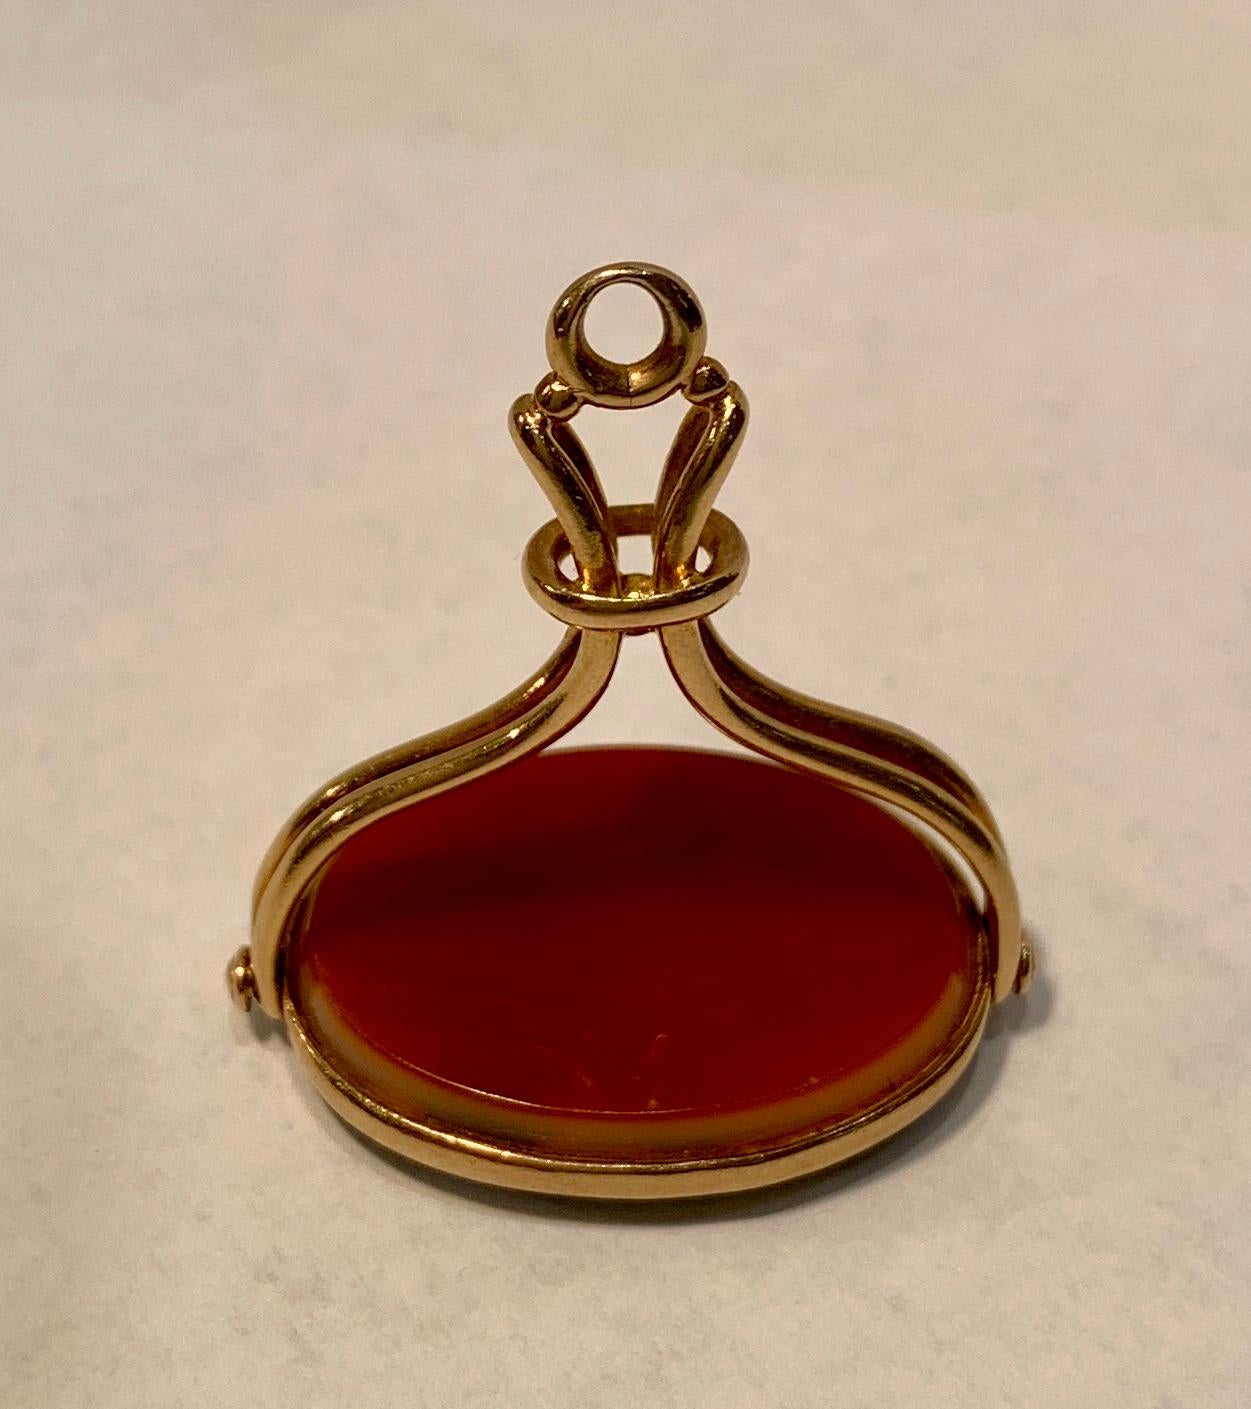 Antique 1850s, early Victorian intaglio spinner fob pendant features a reversible, revolving, beveled oval slice of translucent carnelian on one side and translucent black agate on the other side. The carnelian and agate stones are bezel set in 14